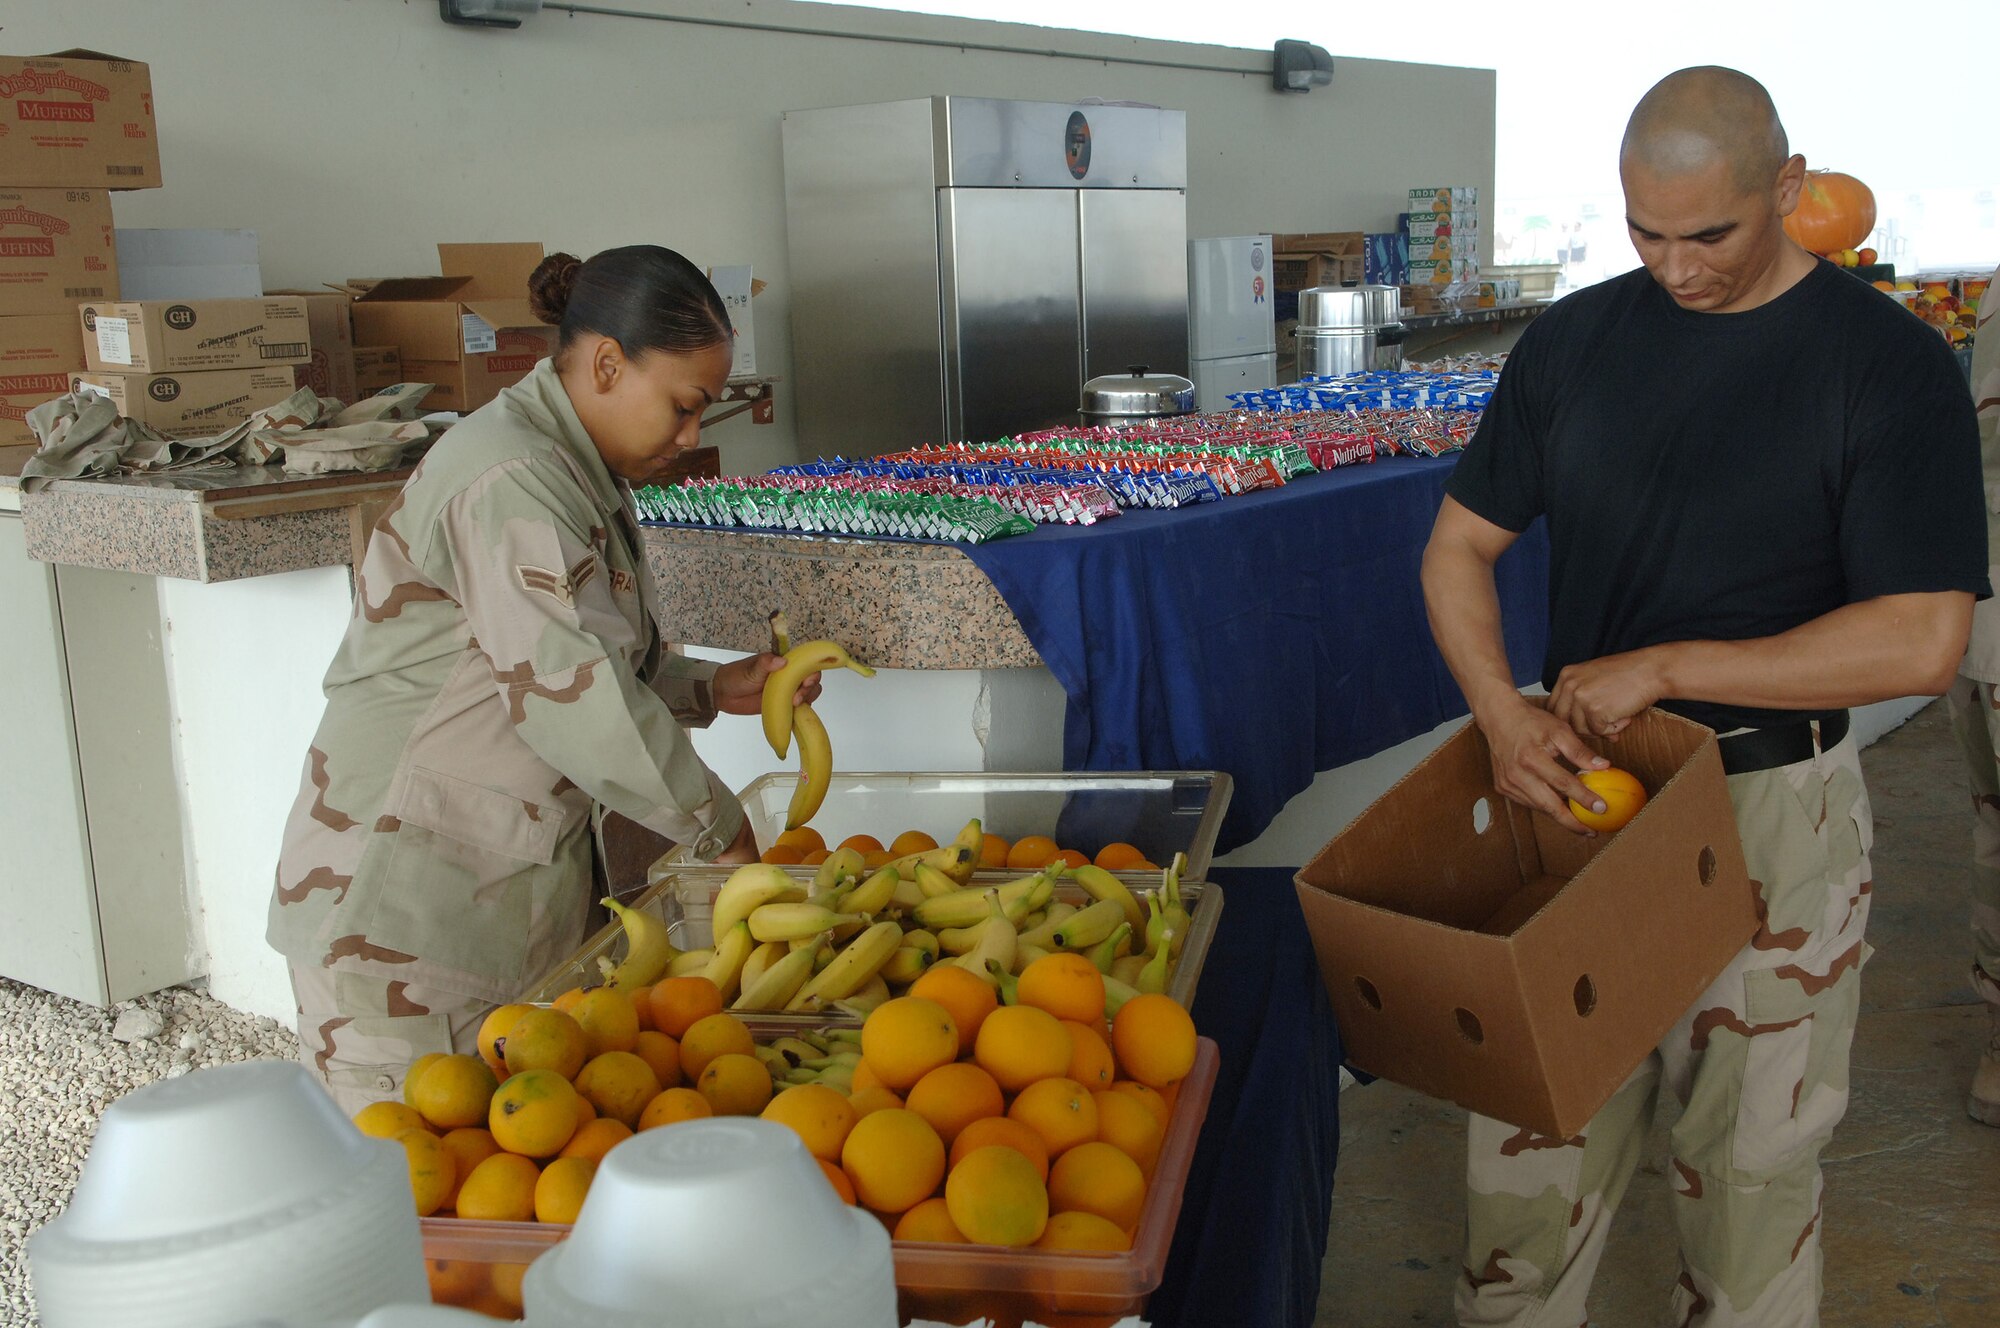 SOUTHWEST ASIA - Tech. Sgt. Rick Rayos and Airman 1st Class Dominique Brandt, 379th Expeditionary Services Squadron, lay out fresh fruit in preparation for the Thanksgiving day breakfast Nov. 22 in the Memorial Plaza at a Southwest Asia air base. Airman Brandt is deployed from Royal Air Forces Mildenhall, England and Sergeant Rayos is deployed from Nellis AFB, Nev. (U.S. Air Force Photo/Master Sgt.Greg Kunkle)